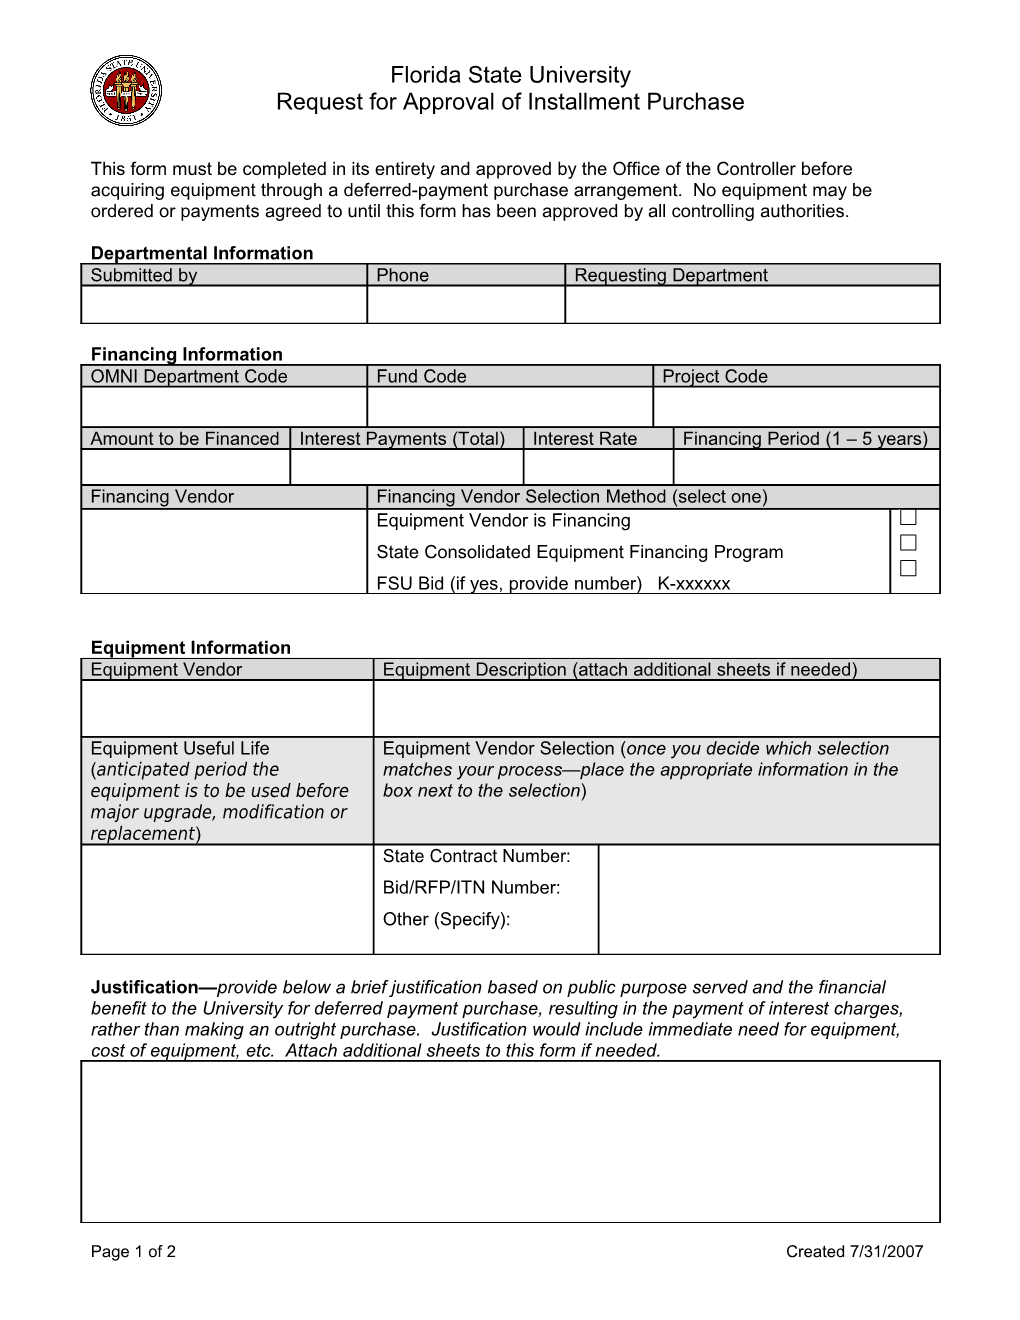 This Form Must Be Completed in Its Entirety and Approved by the Controller S Office Before